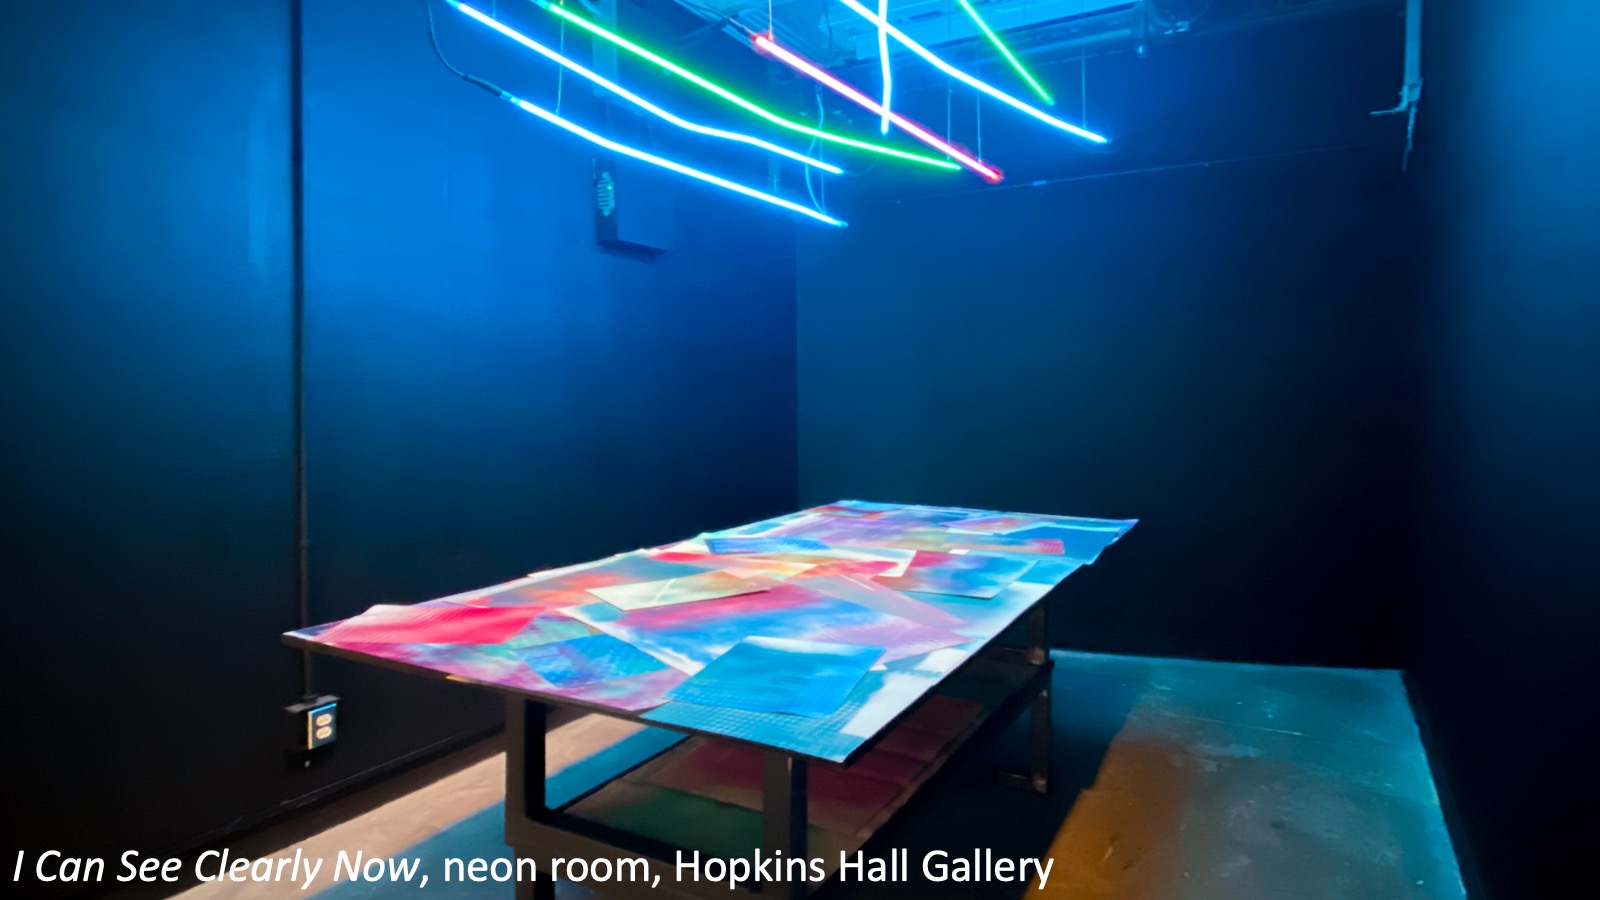 A colorful table under neon lights for the exhibition "I Can See Cleary Now."